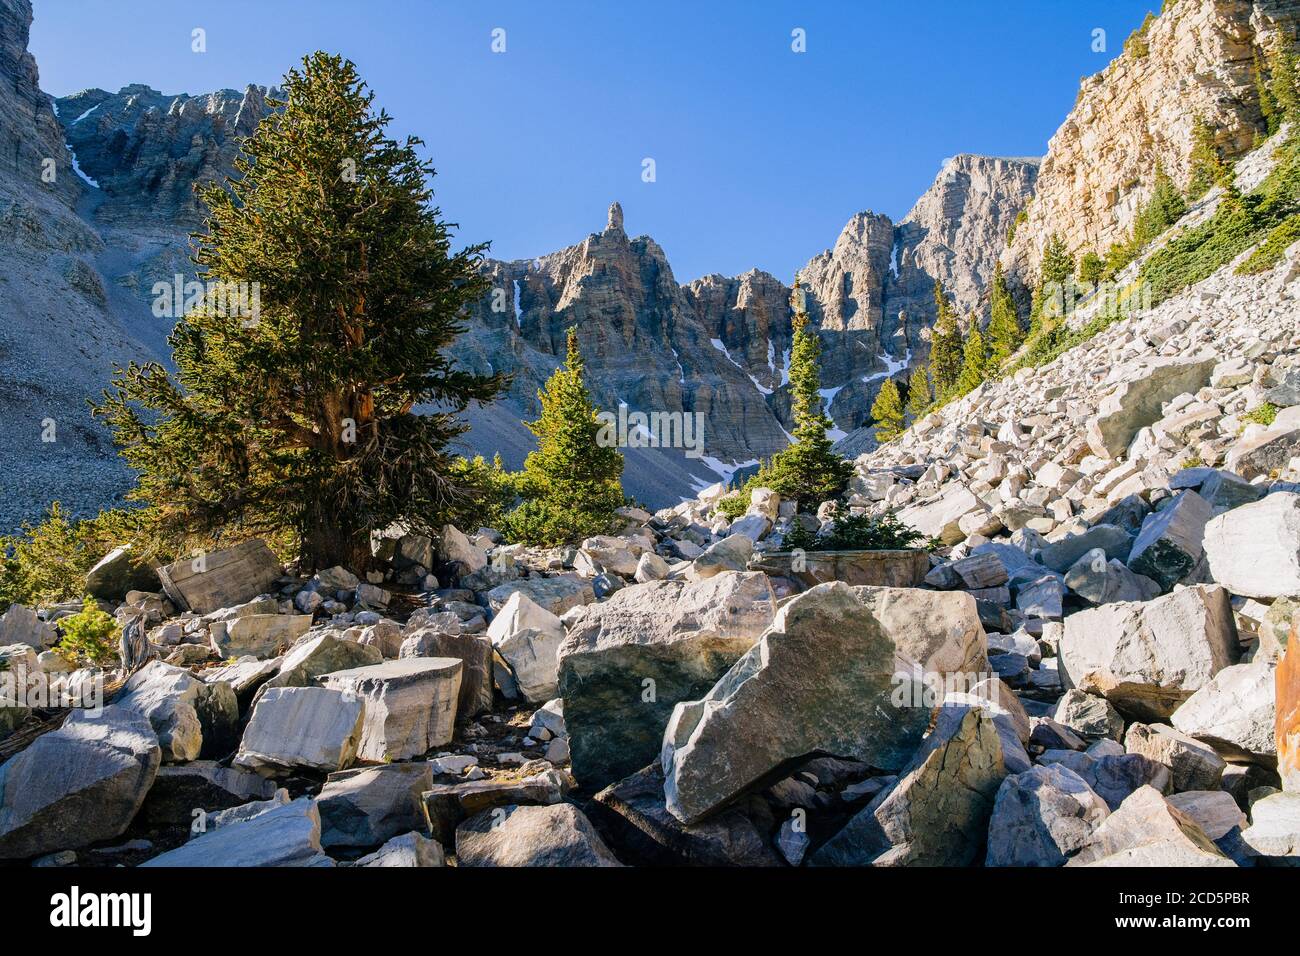 Landscape with bristlecone pine trees and rock debris in valley, Great Basin National Park, White Pine County, Nevada, USA Stock Photo